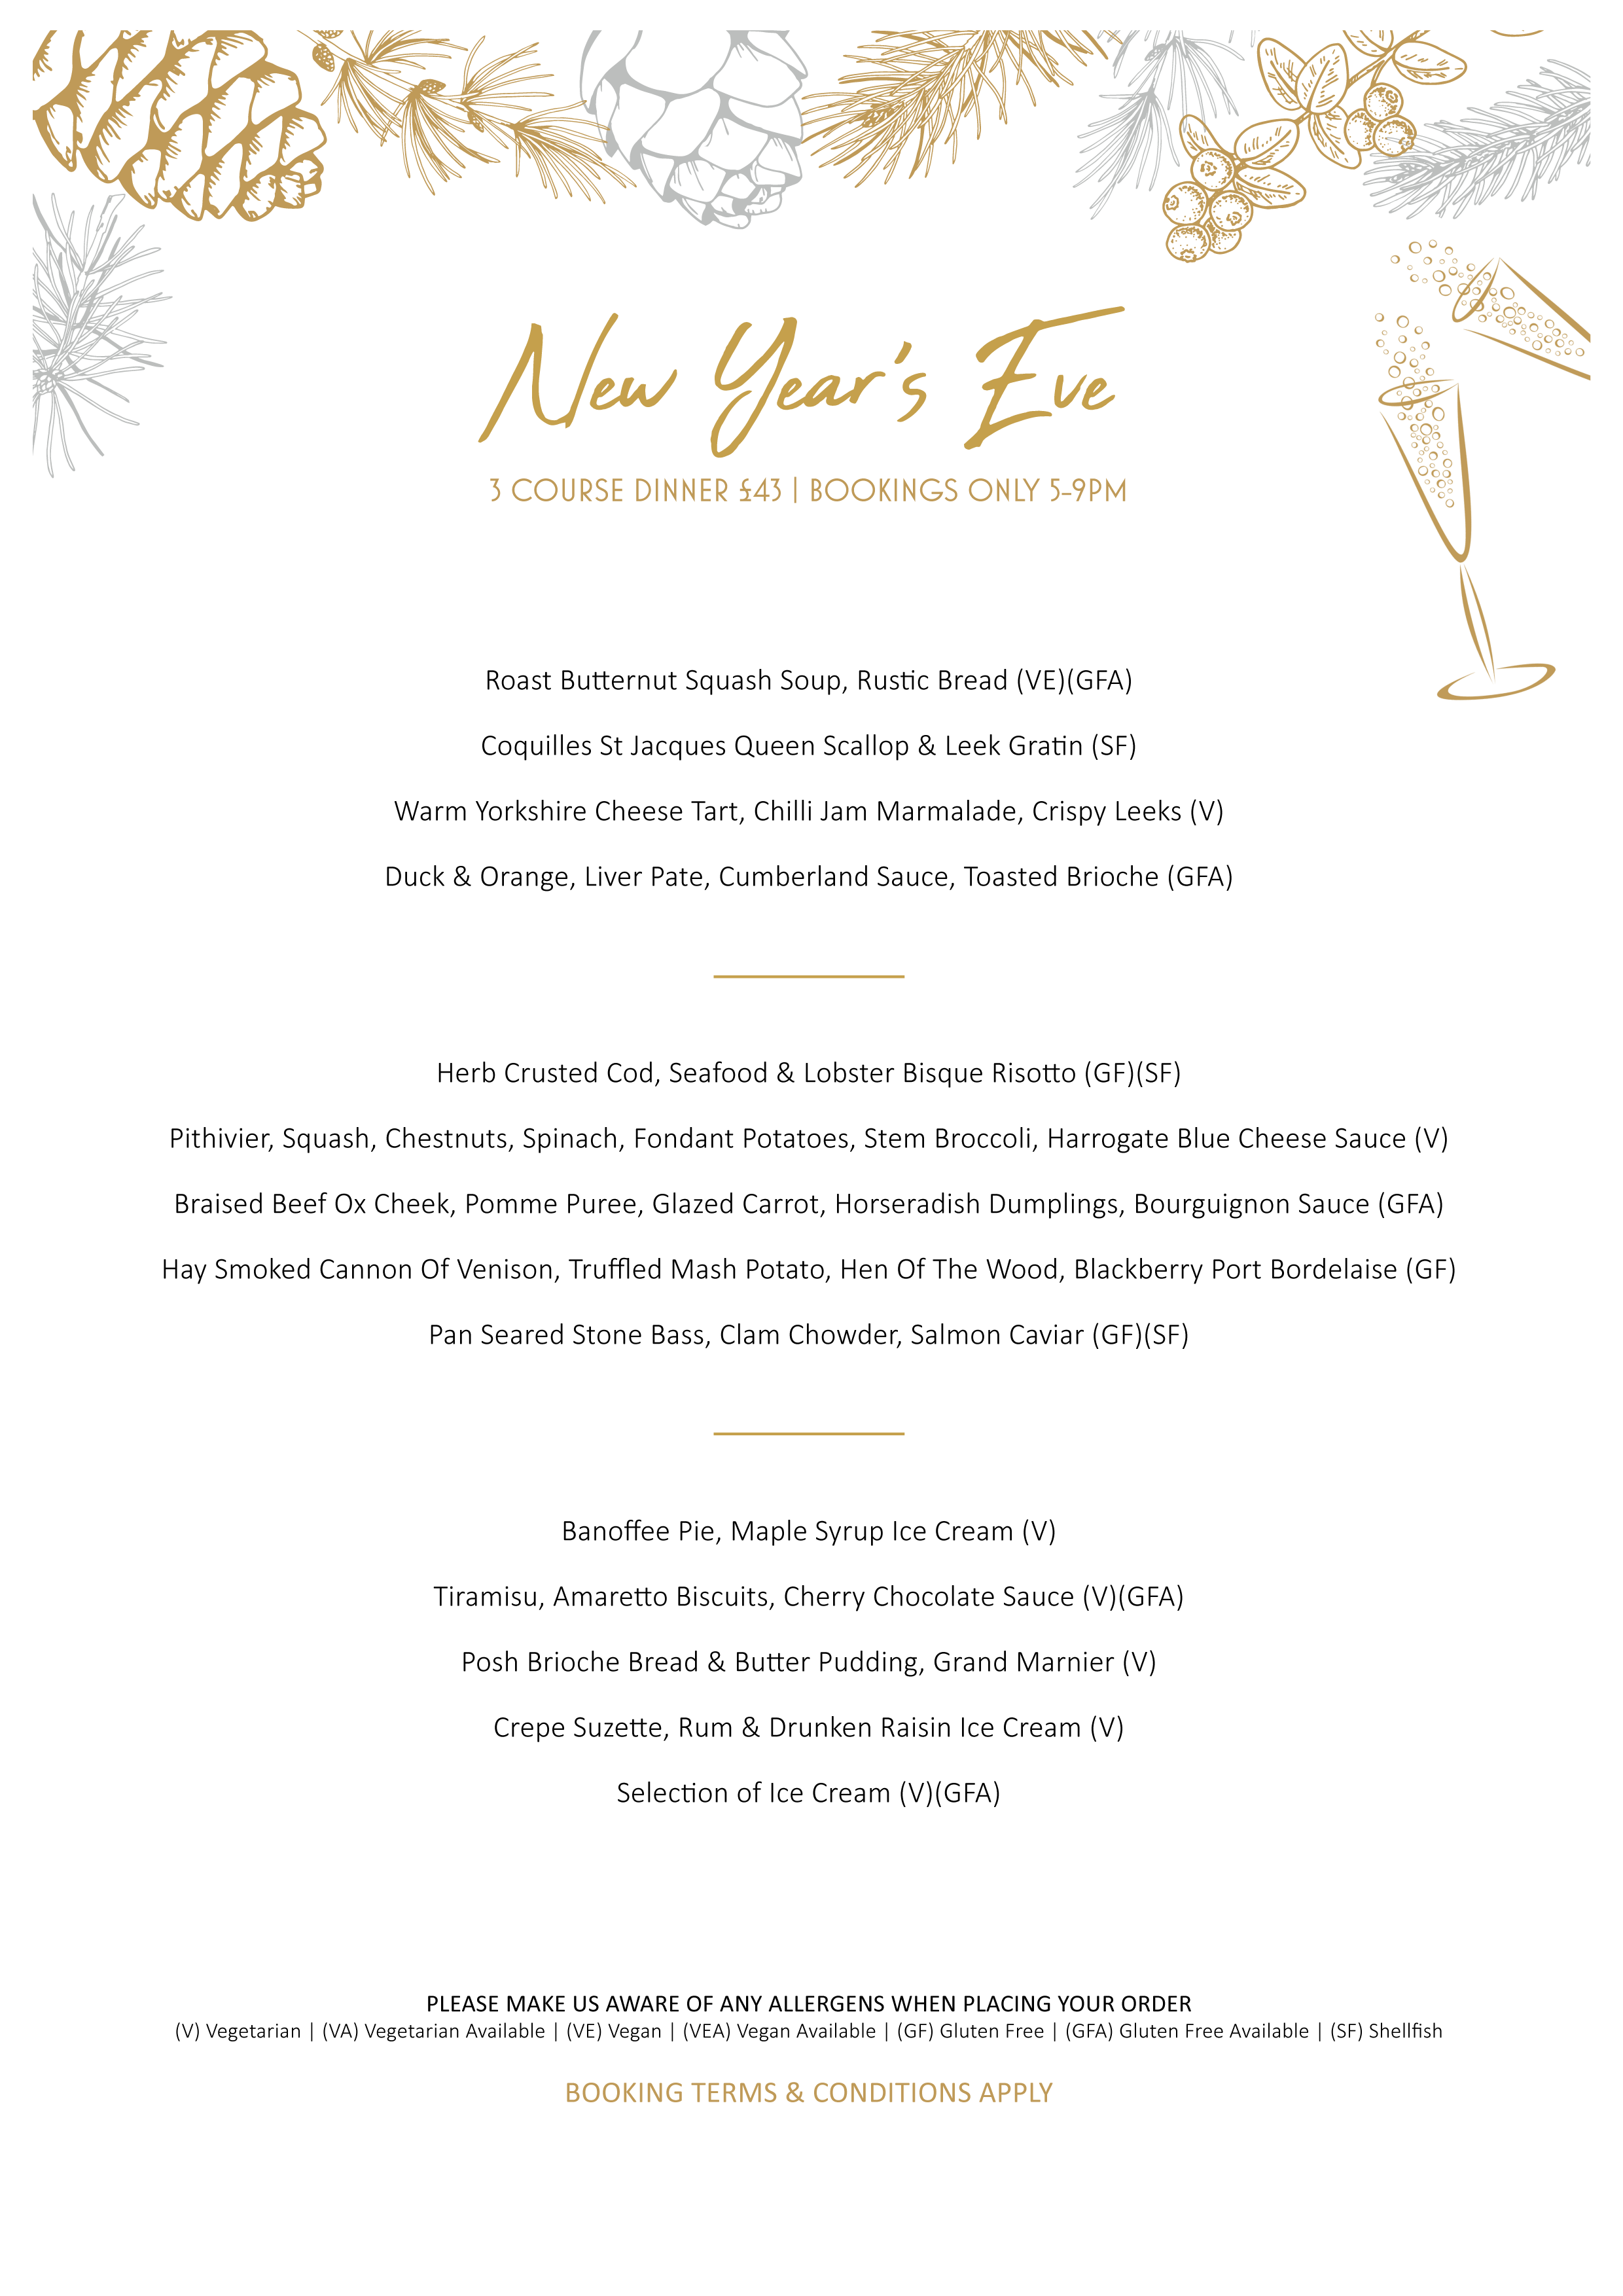 NEW YEAR’S EVE AT THE BLUE BELL IN ARKENDALE – The Blue Bell at Arkendale